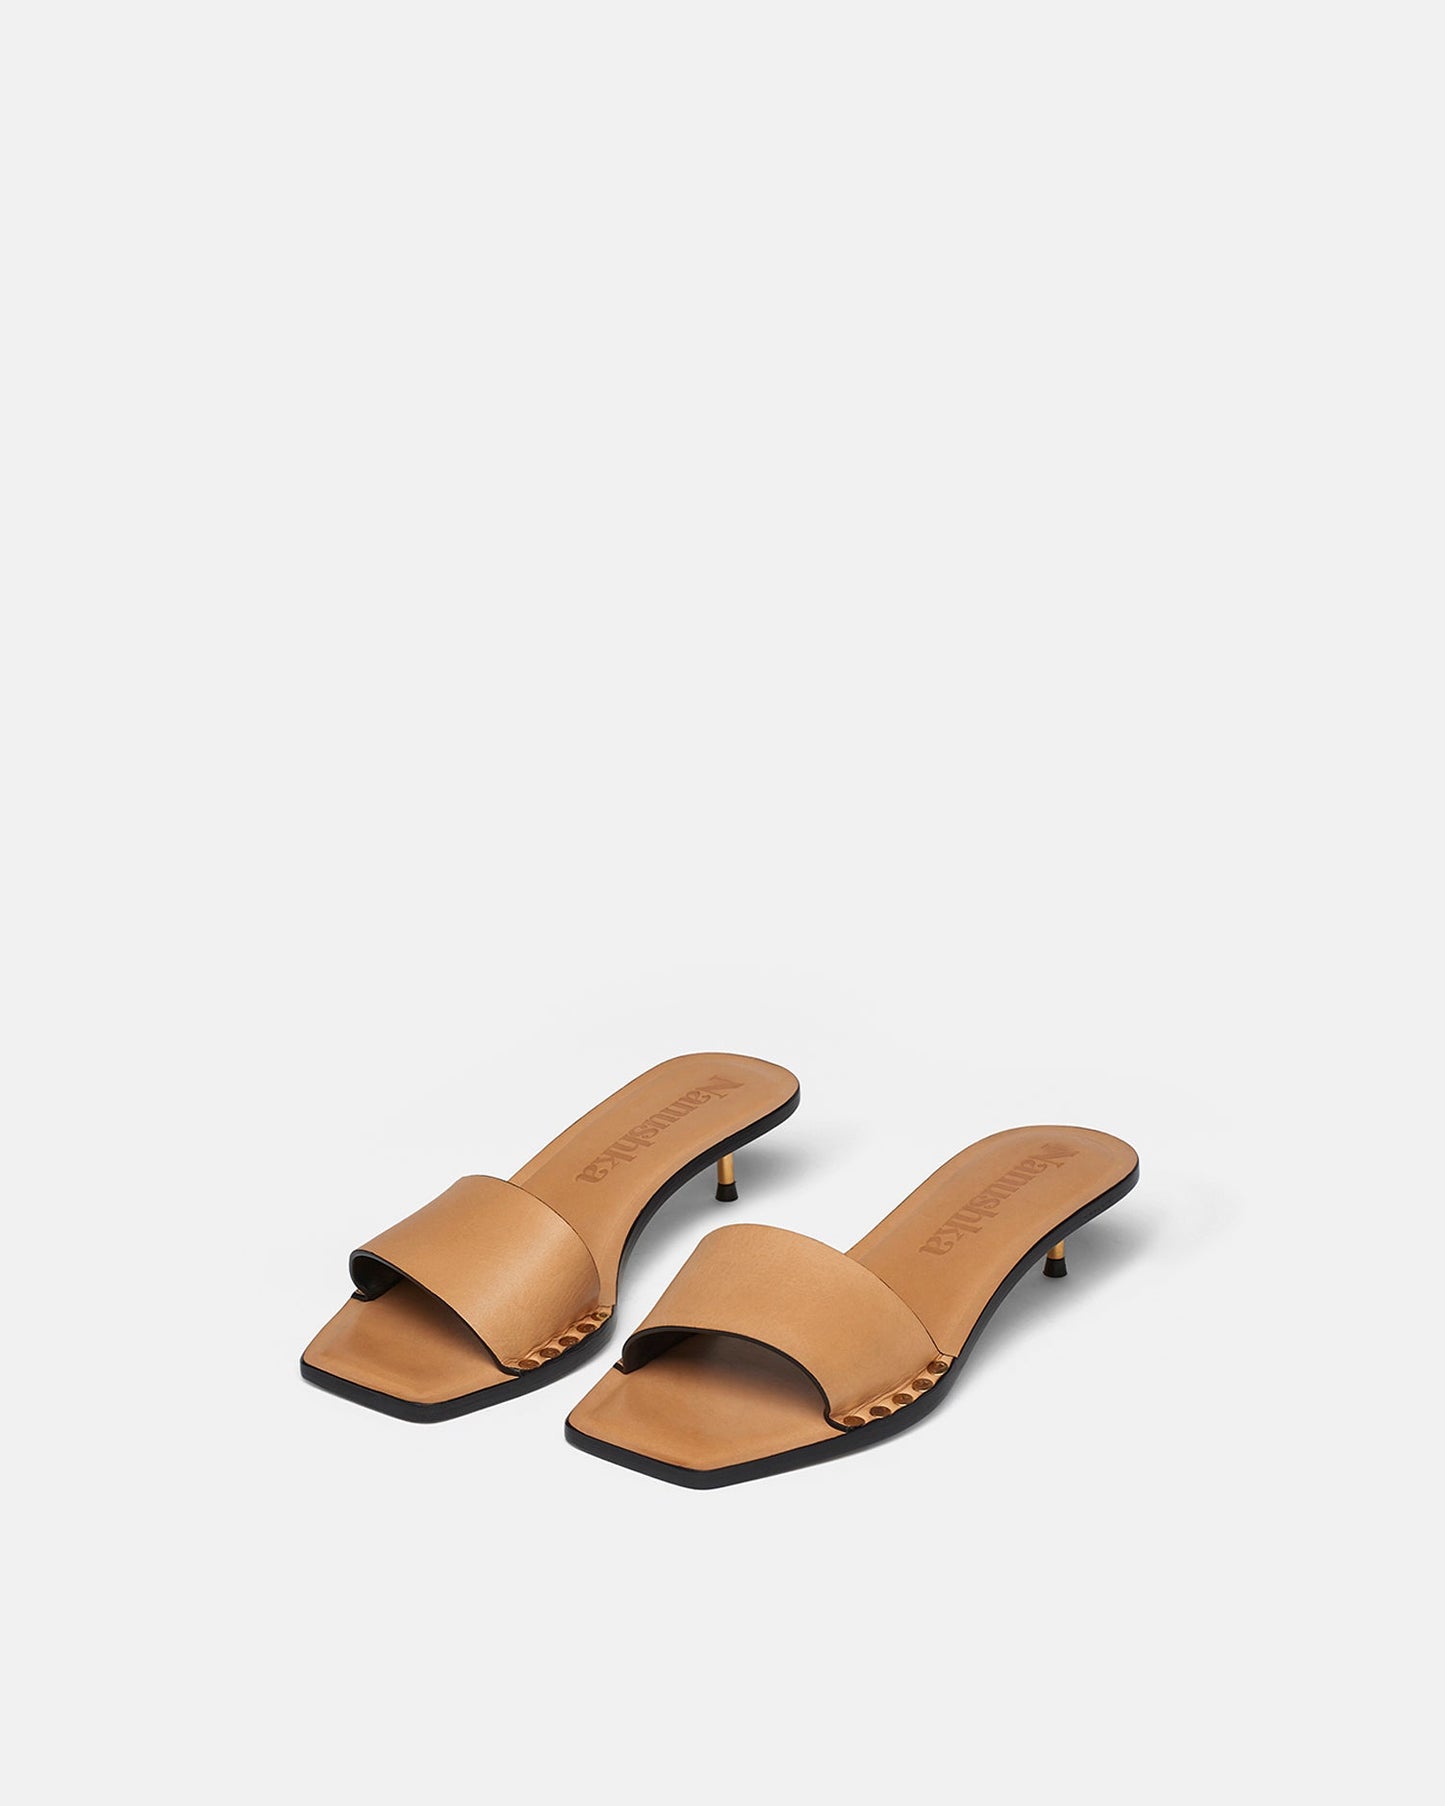 Ibiron - Leather Sandals - Natural Tan